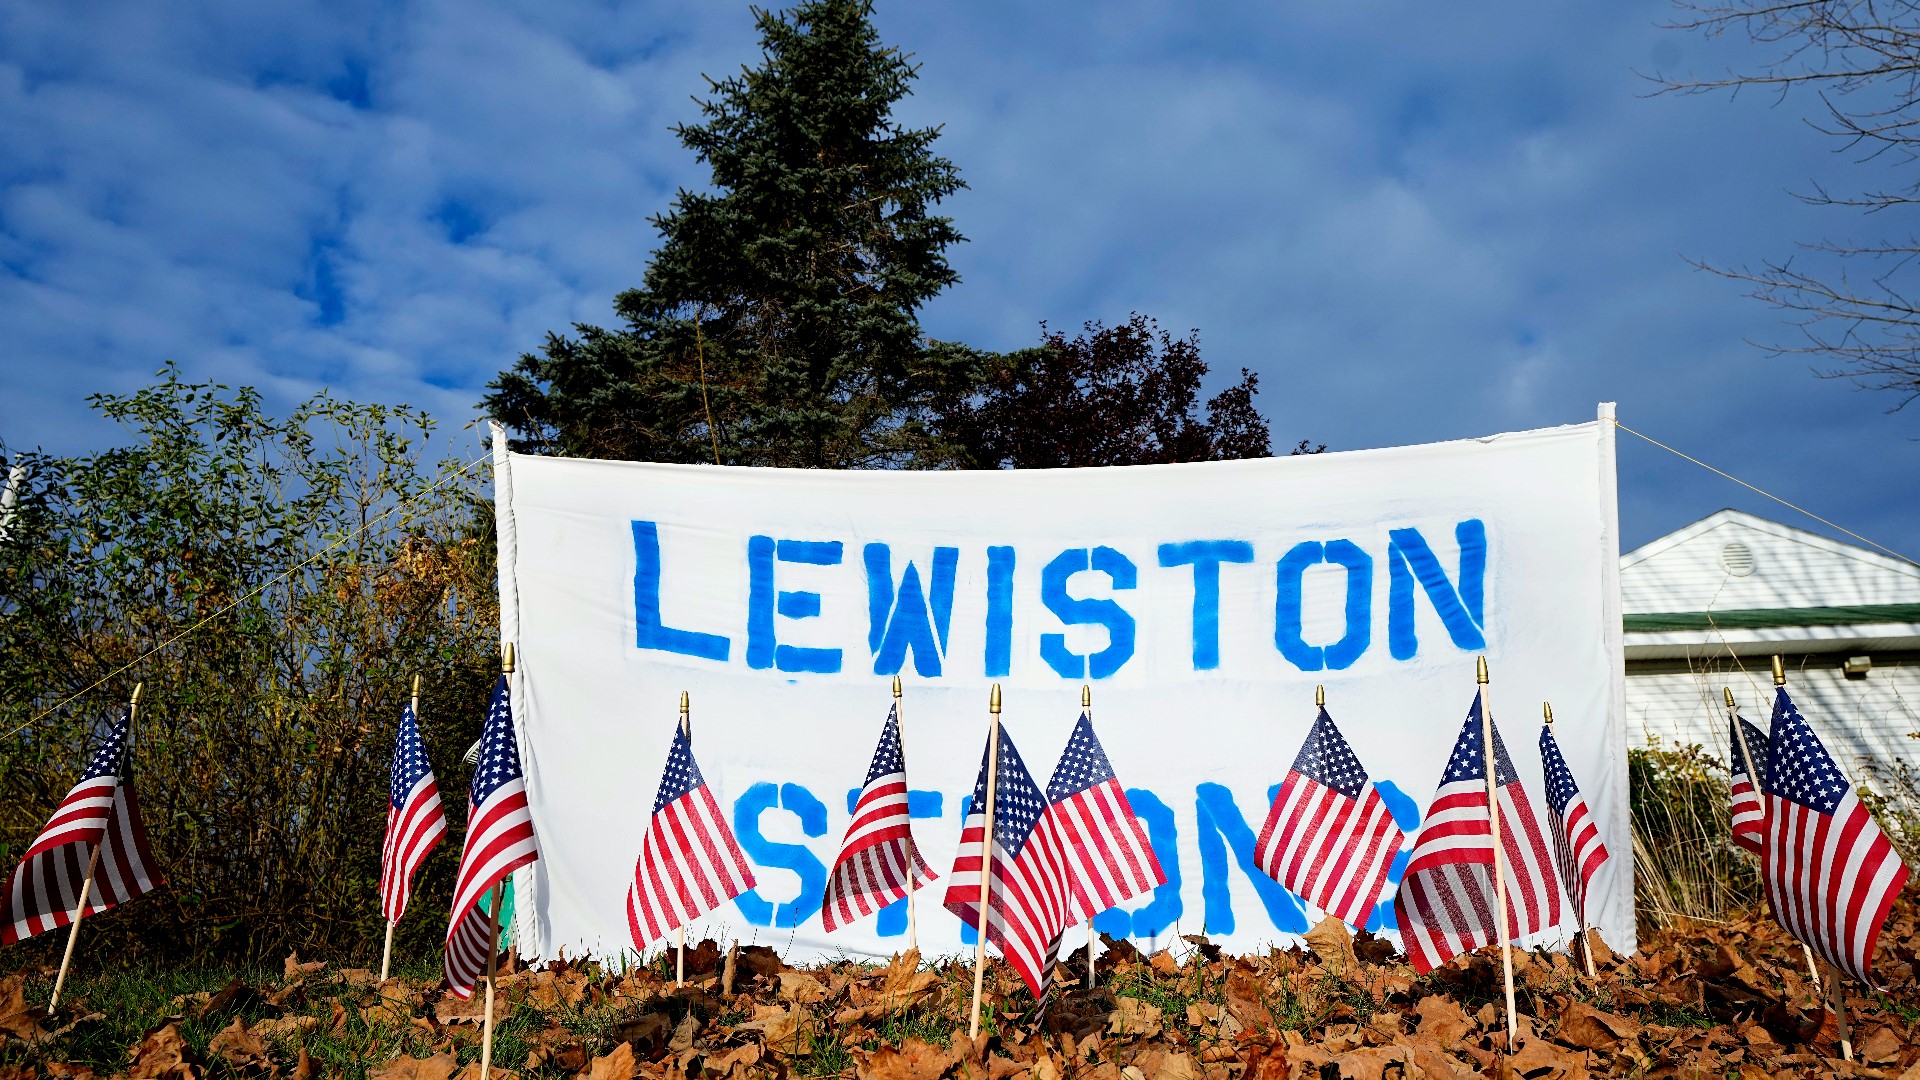 Thursday marks six months since the mass shootings in Lewiston, and several nonprofits are getting some financial help.